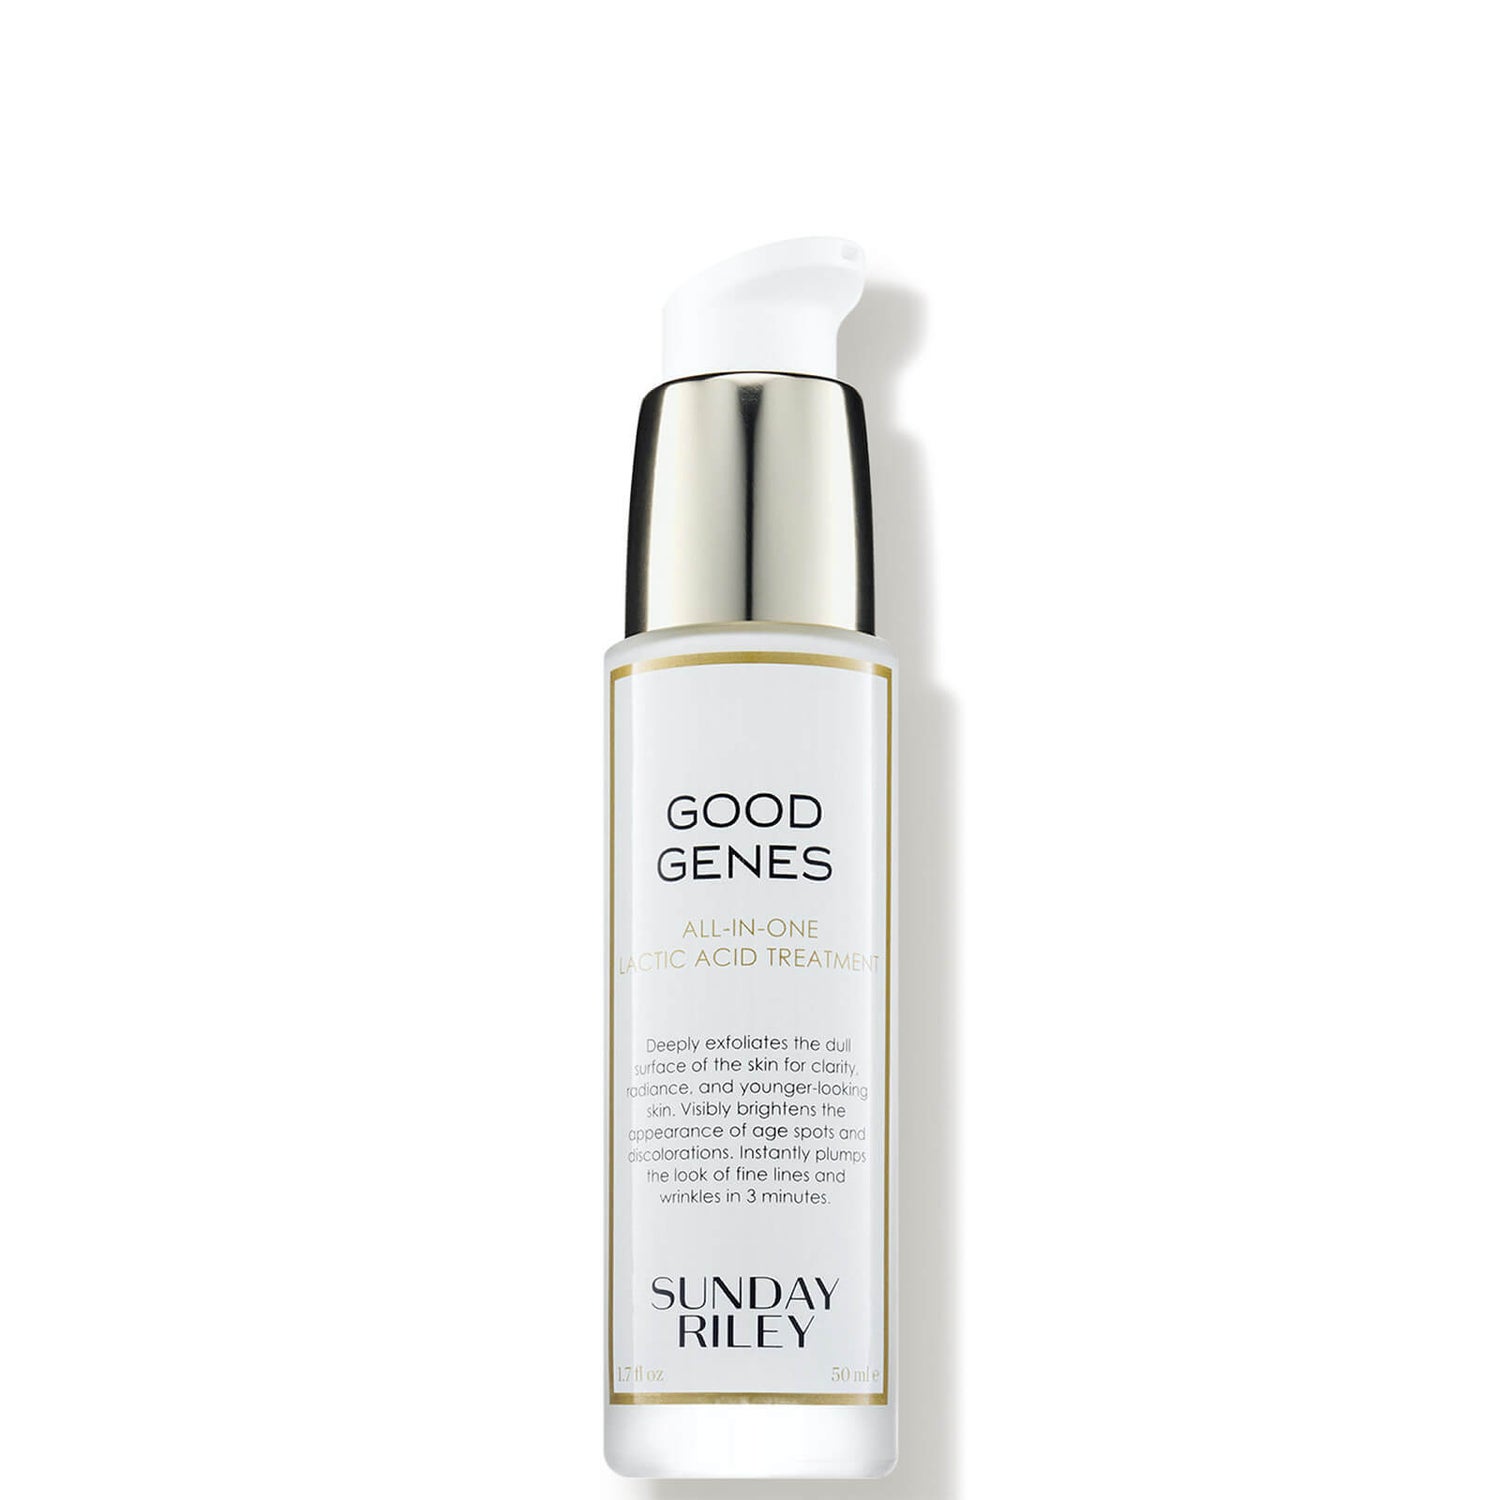 Sunday Riley GOOD GENES All-In-One Lactic Acid Treatment (1.7 oz. - $175 Value)